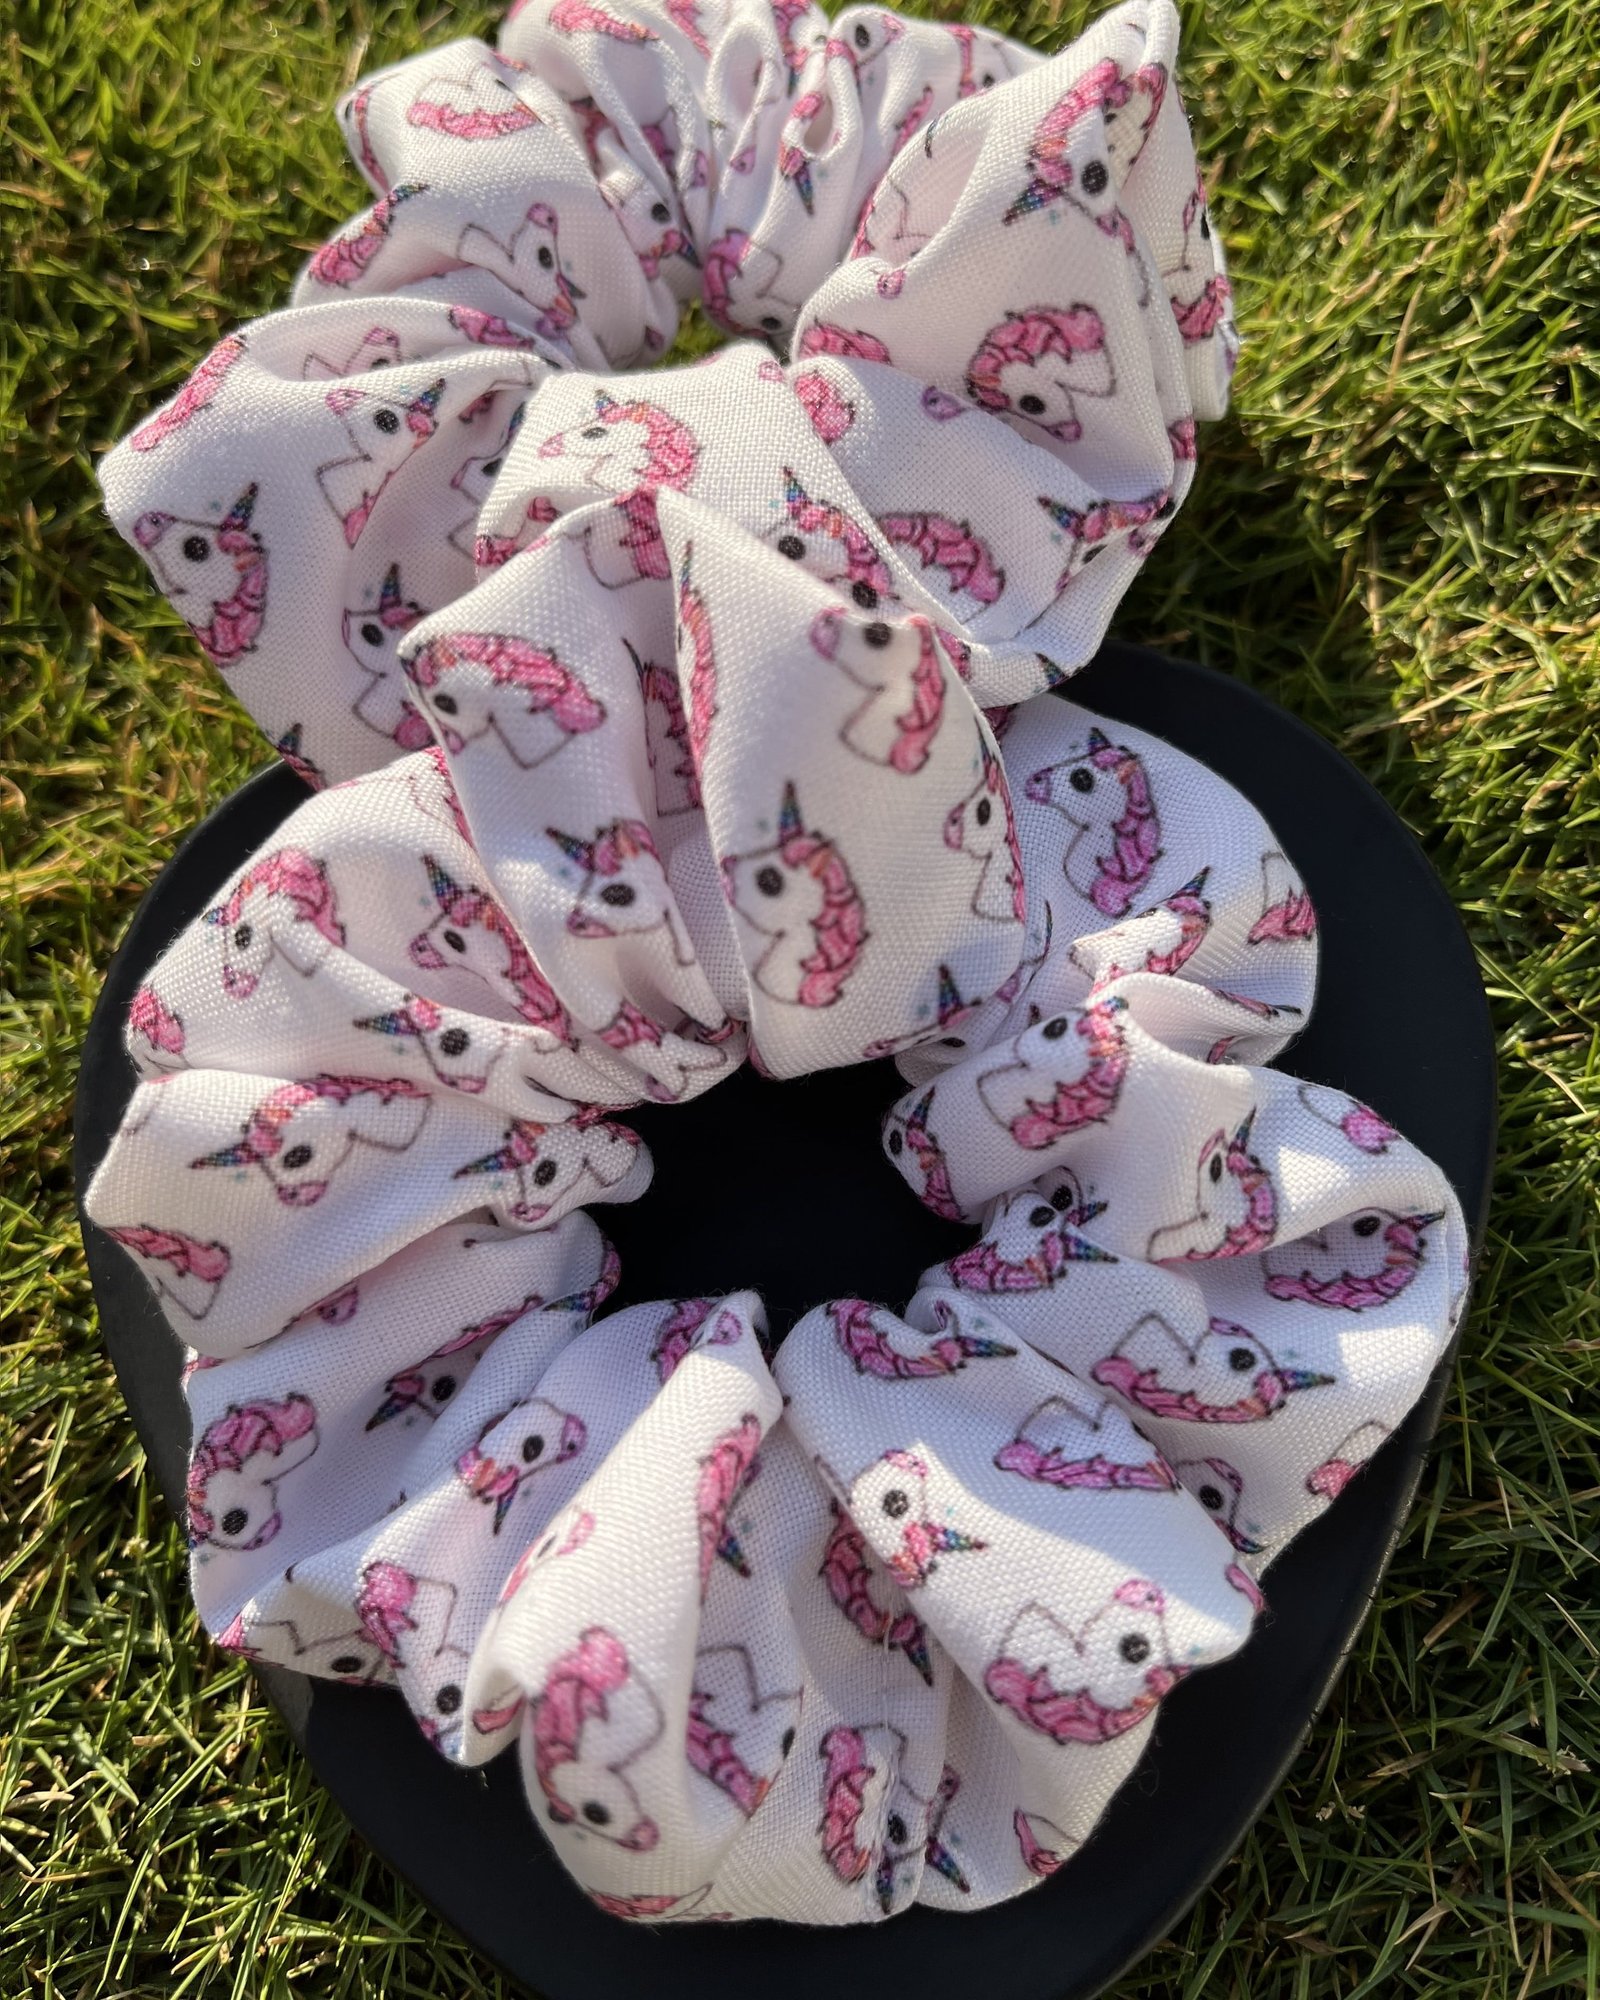 Whimsical Stellina Unicorn scrunchies, perfect for adding a magical and colorful touch to your hairstyles, inspired by enchanting unicorns.